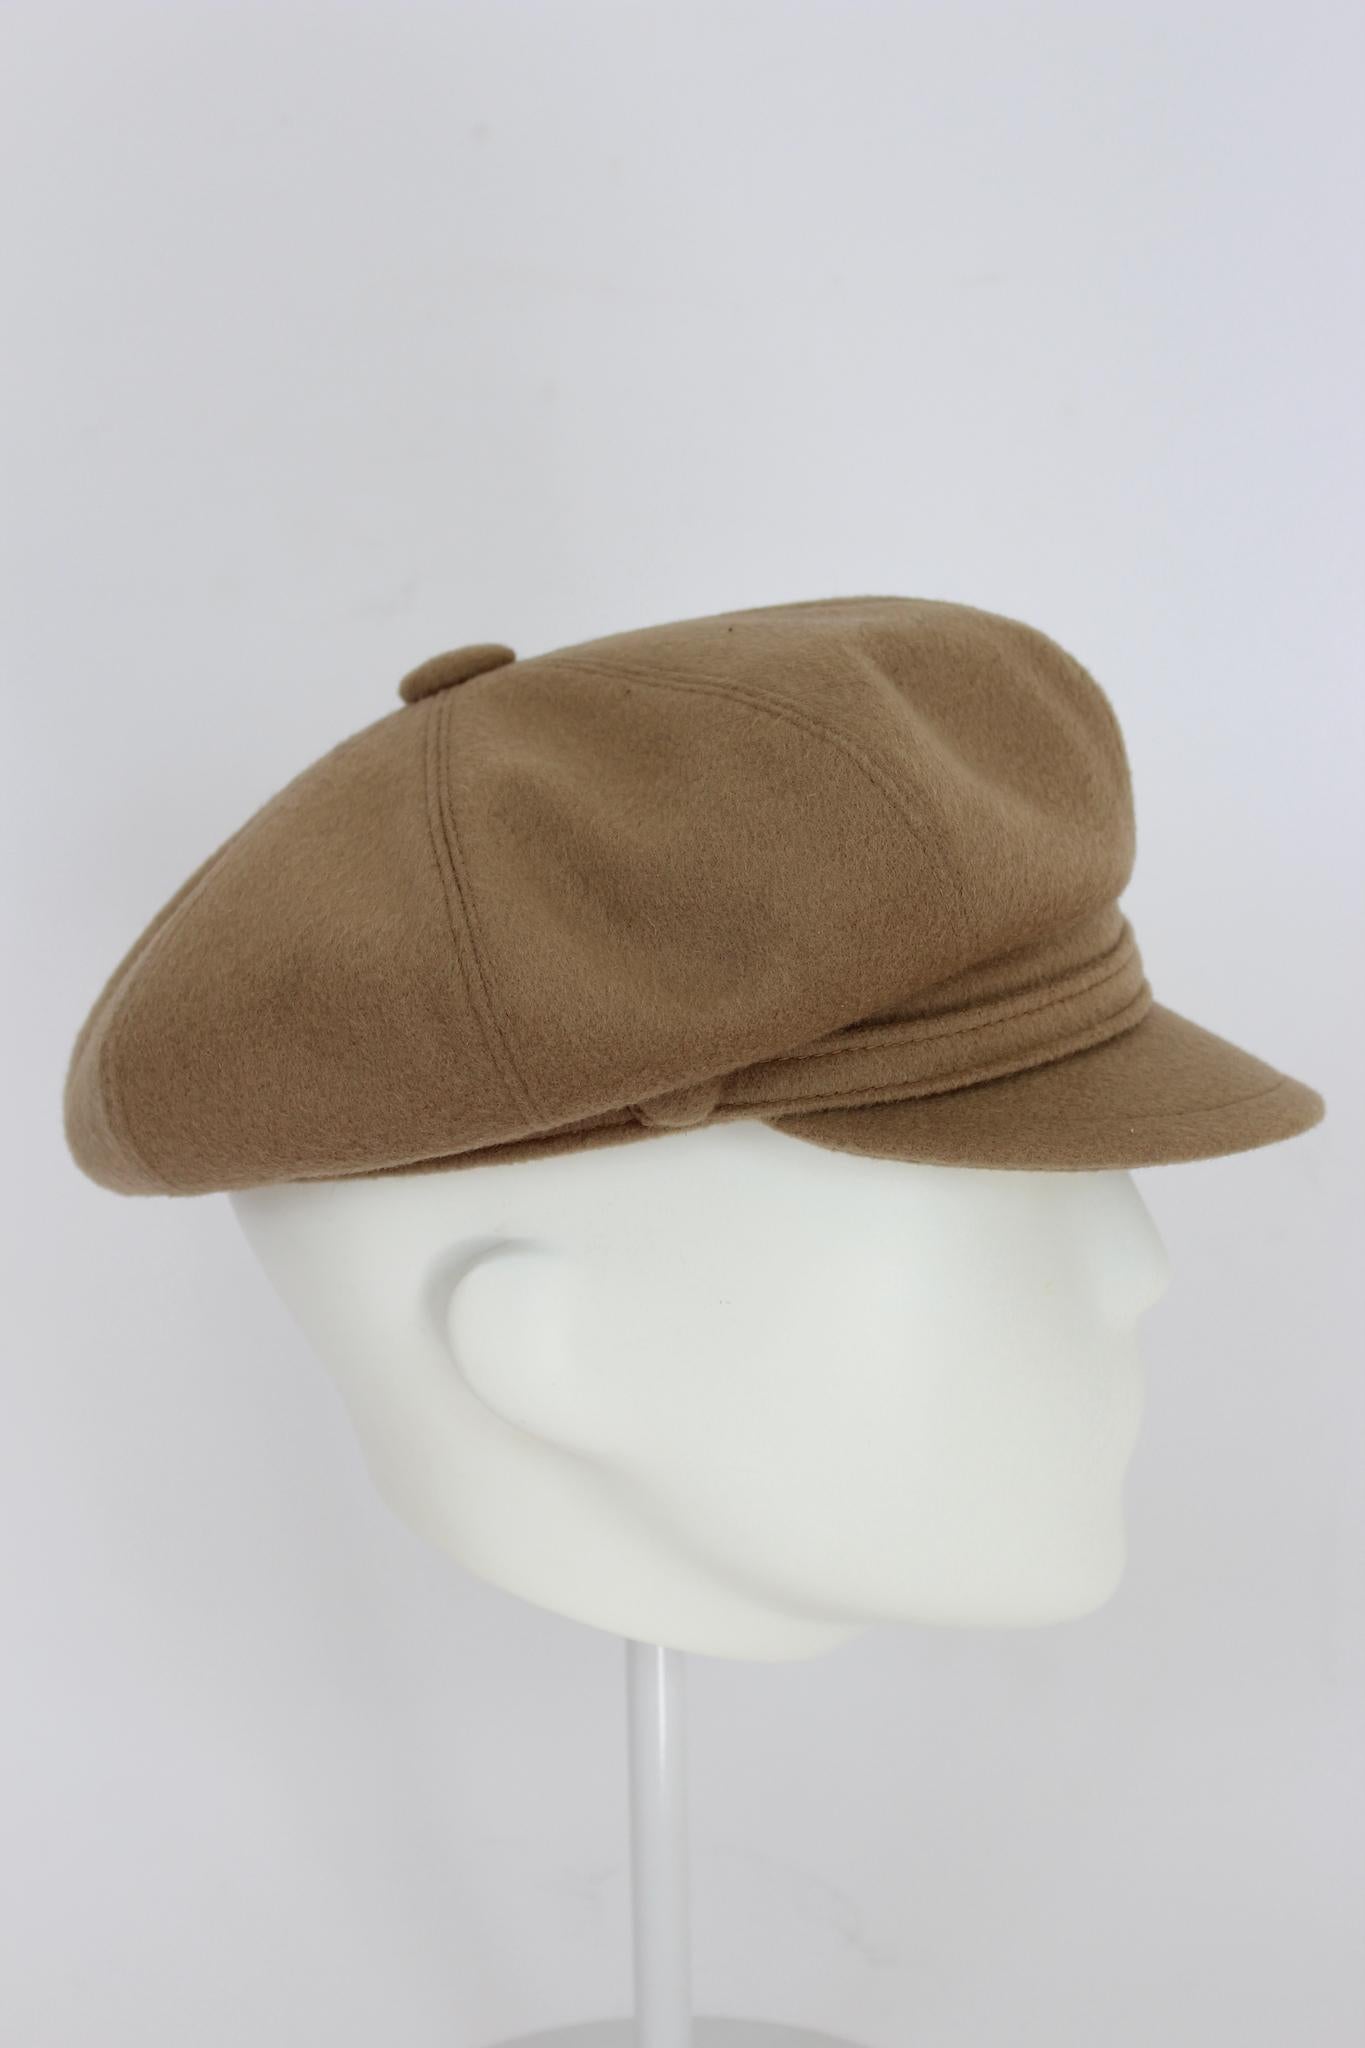 Panizza Beige Wool Vintage Flat Cap In Excellent Condition For Sale In Brindisi, Bt